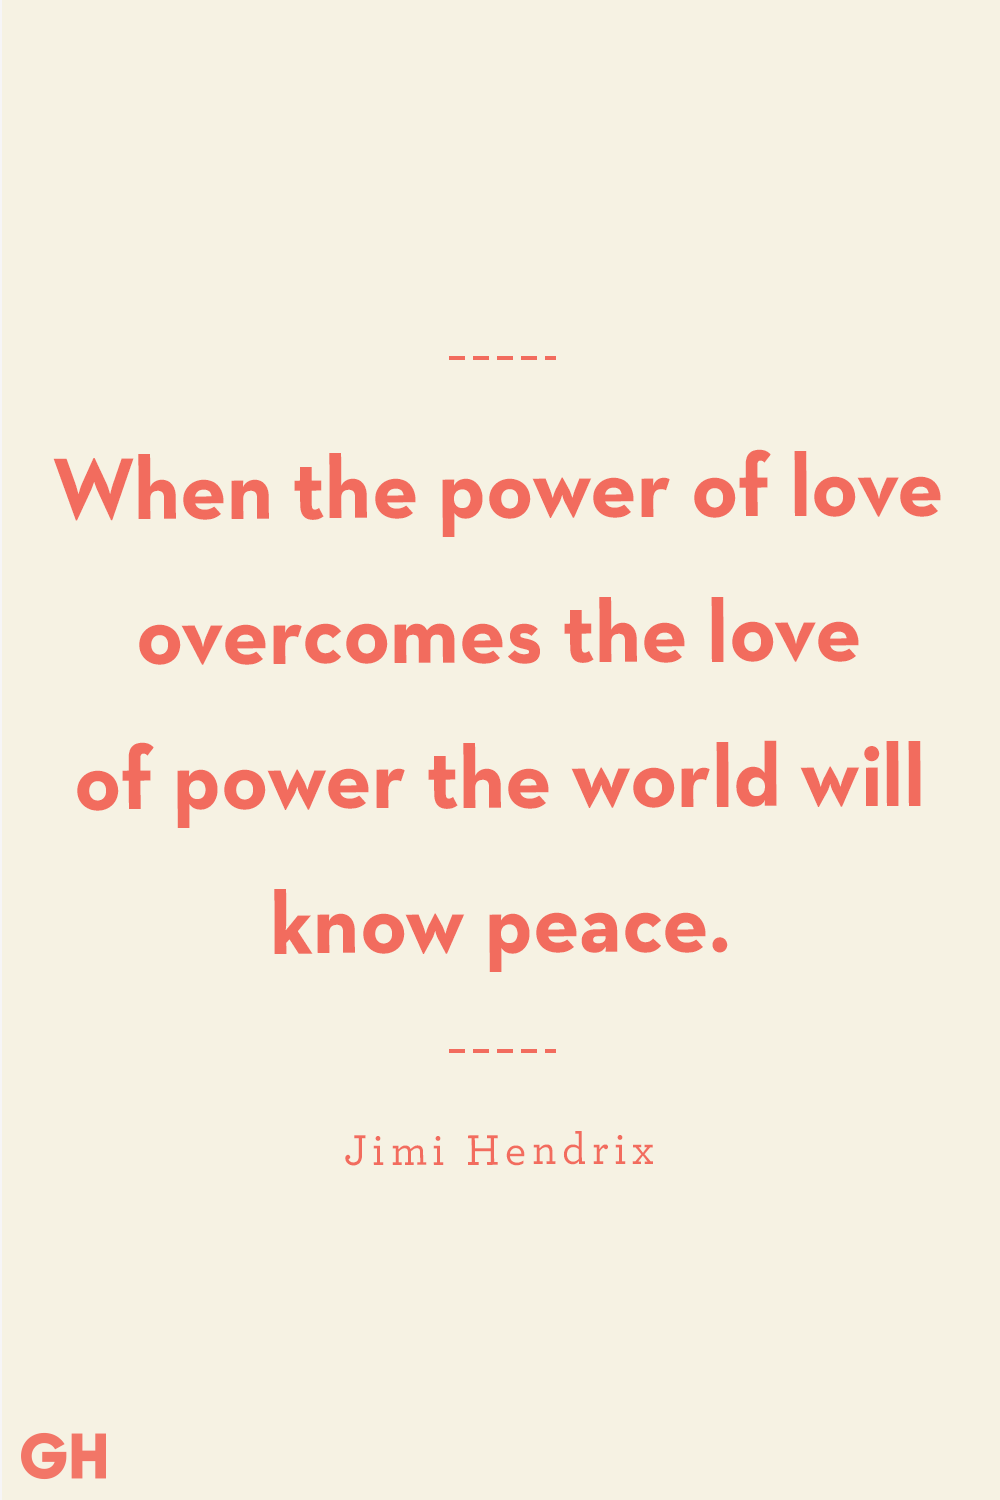 quotes about peace jimi hendrix